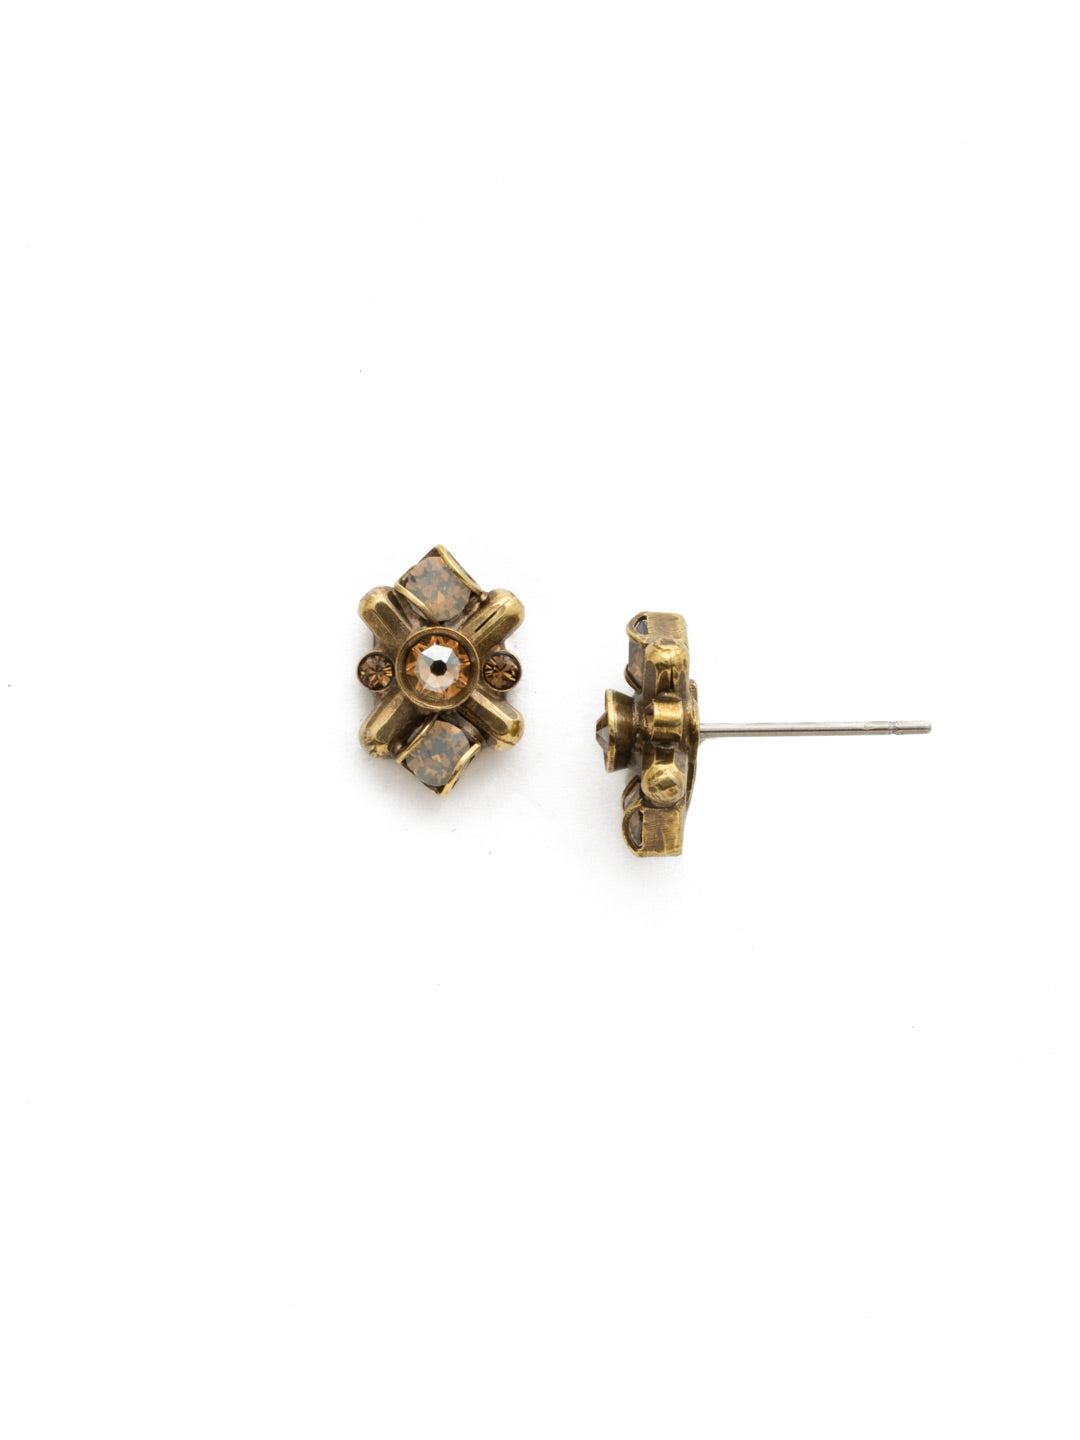 Aralia Stud Earrings - EDX3AGSTN - A small round crystal lays at the center of a metal X formation with delicate gems placed all around. From Sorrelli's Sandstone collection in our Antique Gold-tone finish.